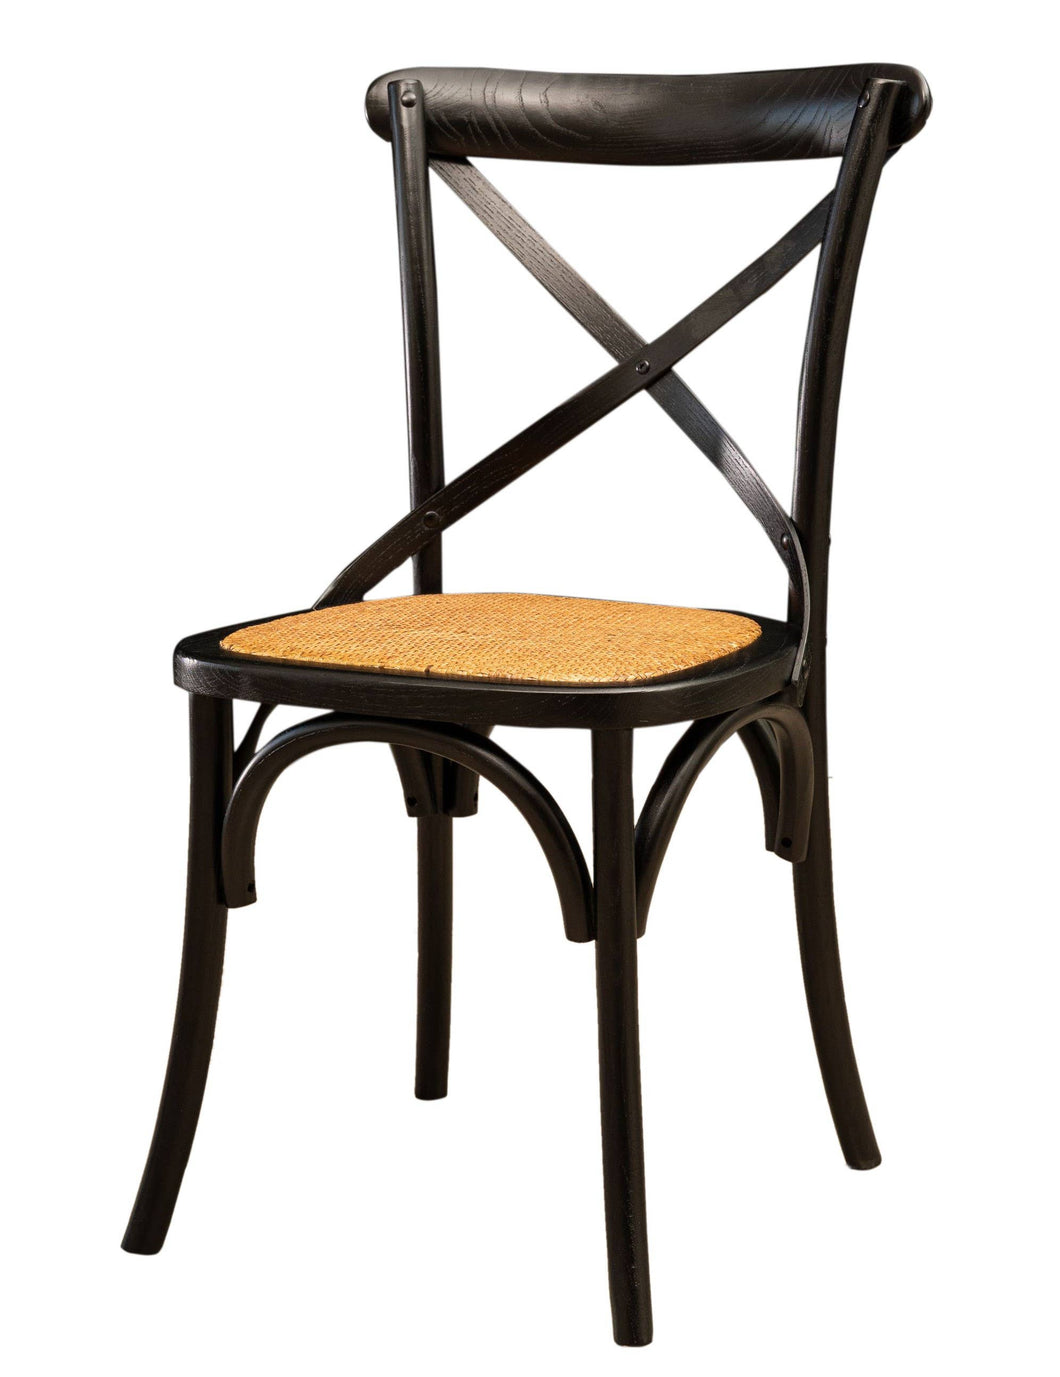 Black Chair In Solid Ash Wood And Rattan Seat